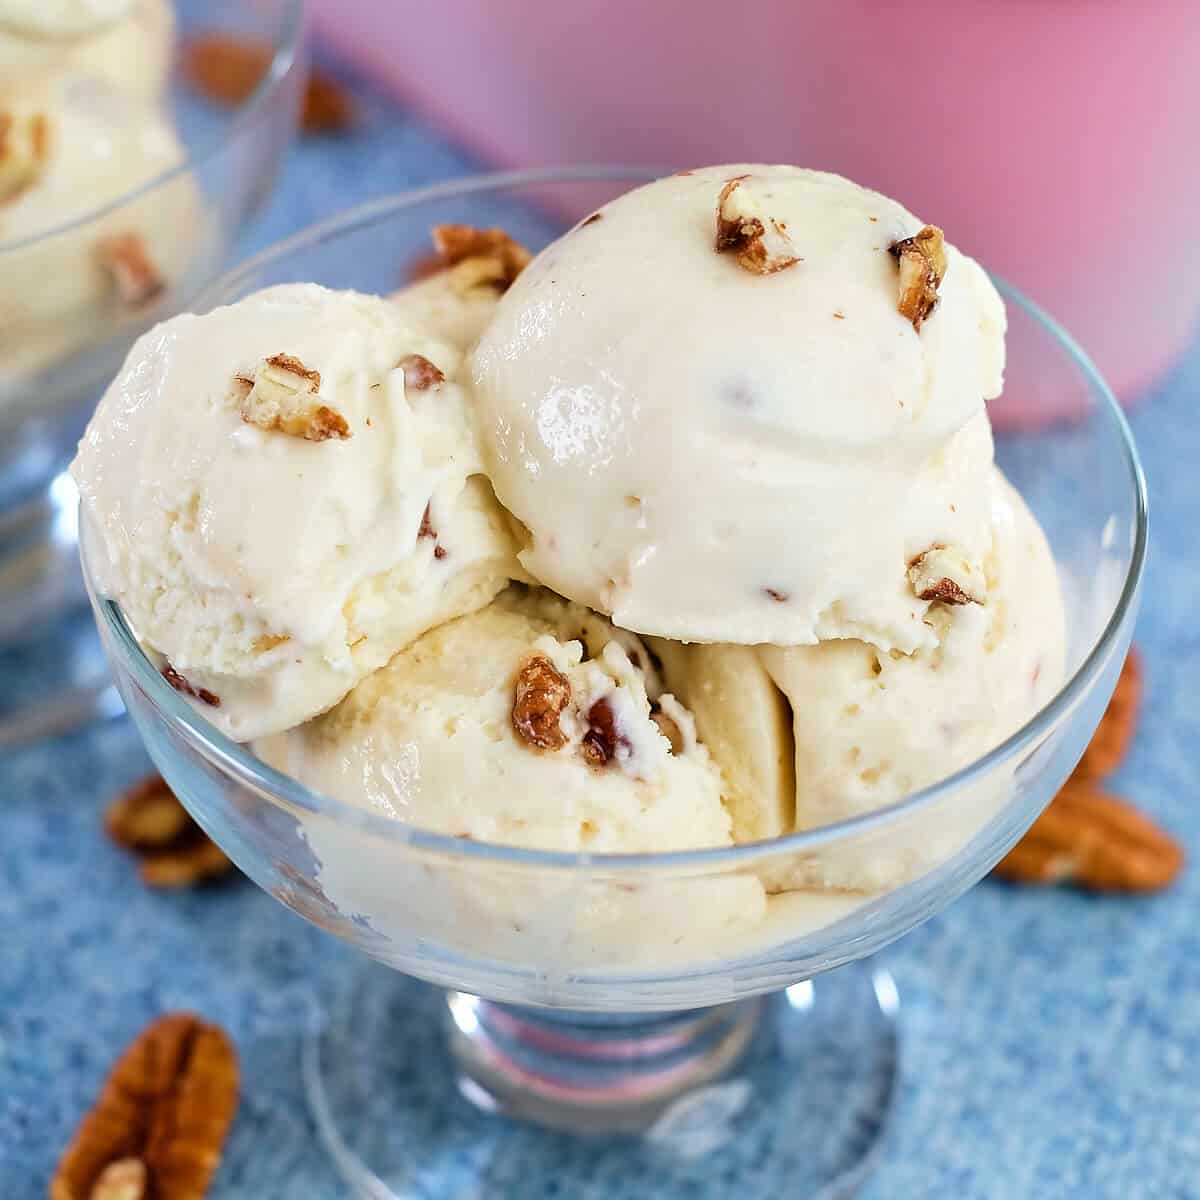 https://www.thedeliciouscrescent.com/wp-content/uploads/2023/03/Maple-Ice-Cream-6.jpg